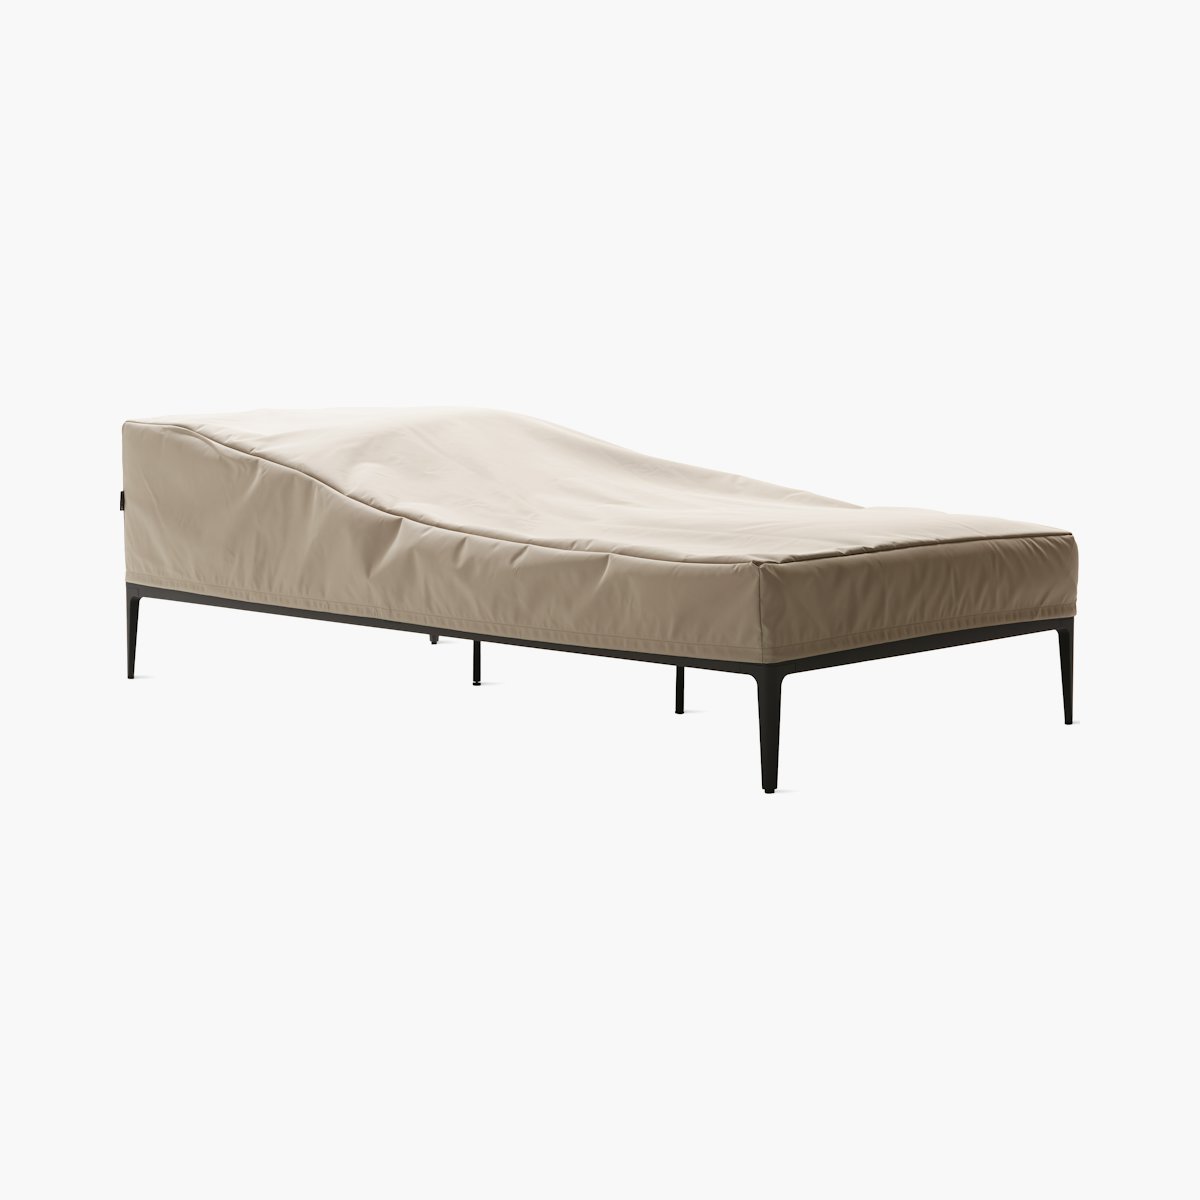 Grid Sofa Chaise Cover Outlet